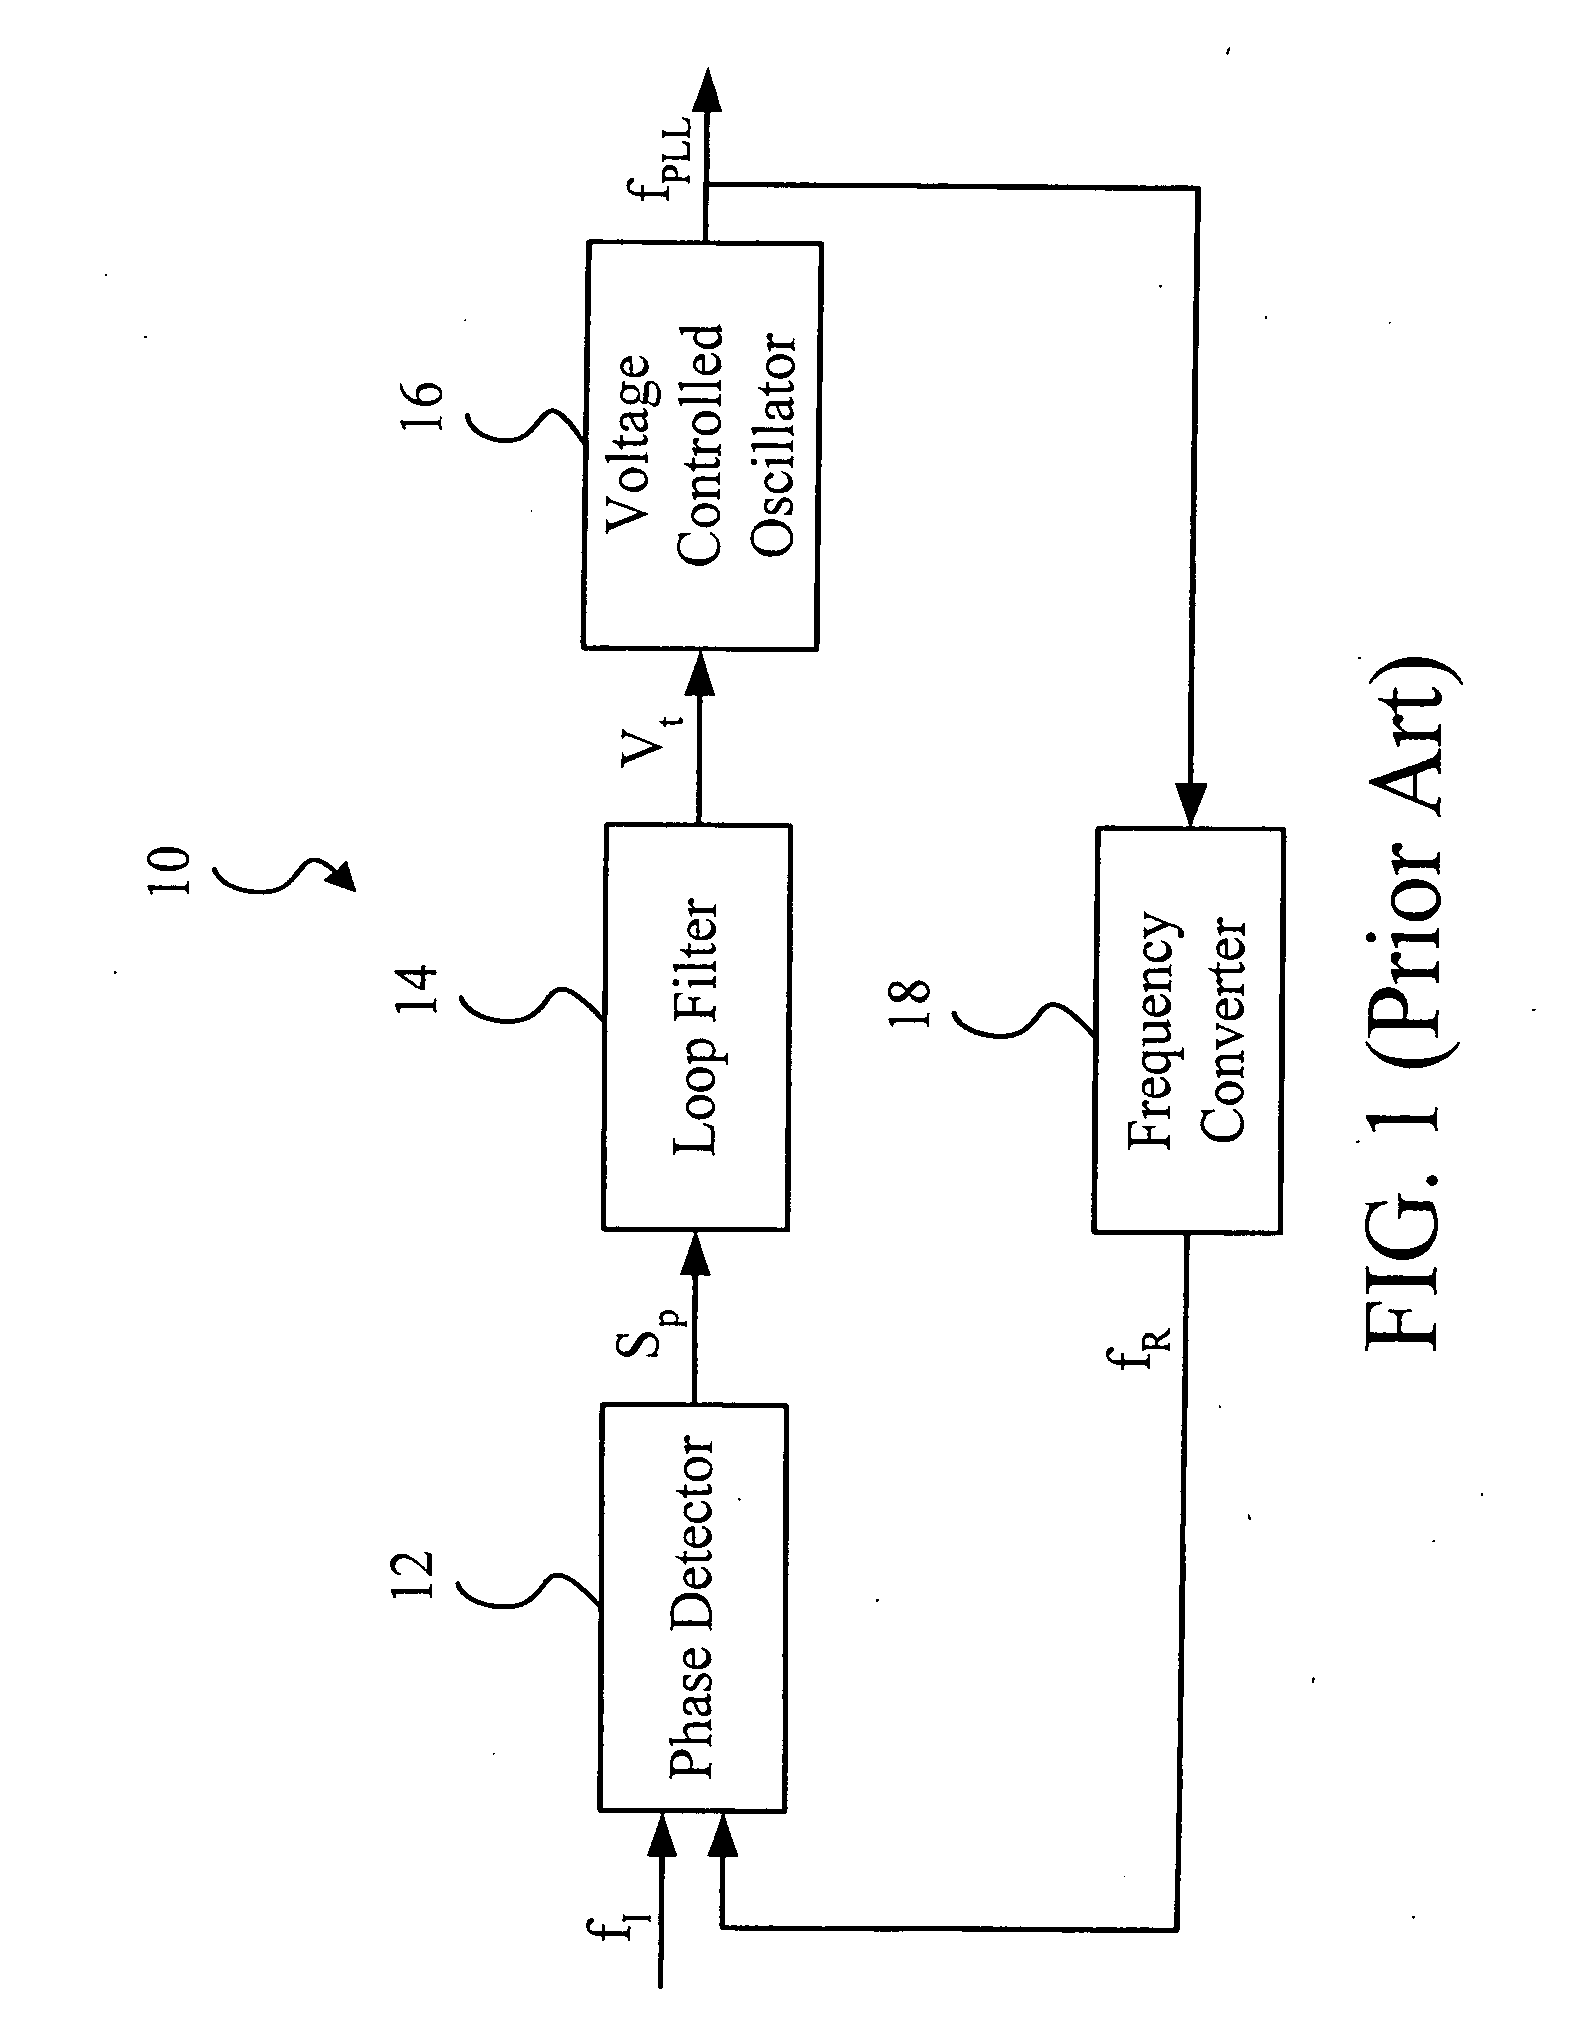 Phase-locked loop with VCO tuning sensitivity compensation